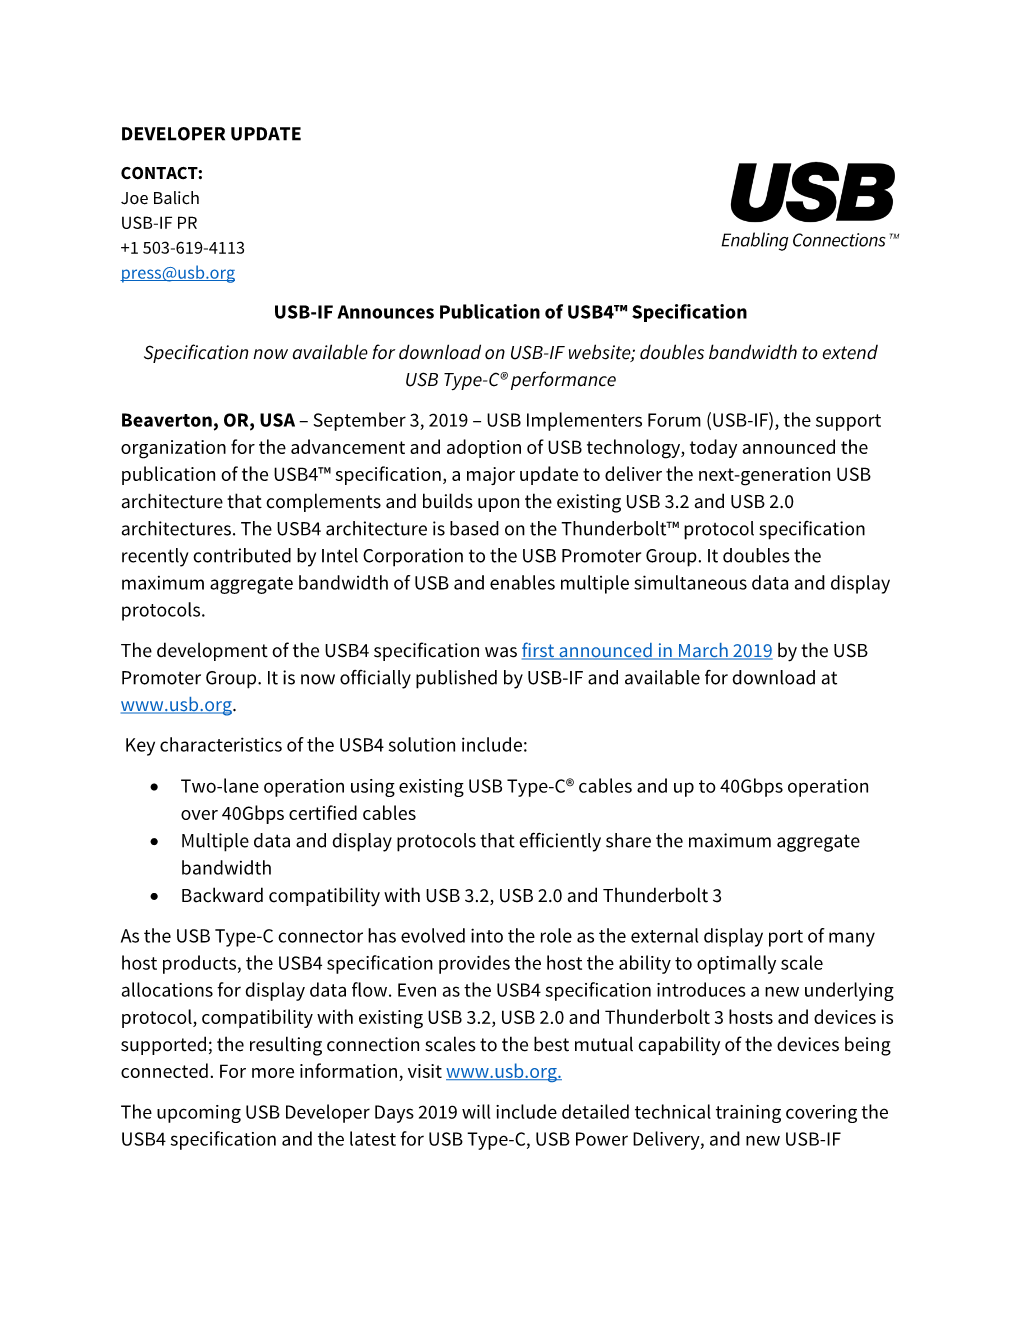 USB-IF Announces Publication of USB4™ Specification Specification Now Available for Download on USB-IF Website; Doubles Bandwidth to Extend USB Type-C® Performance